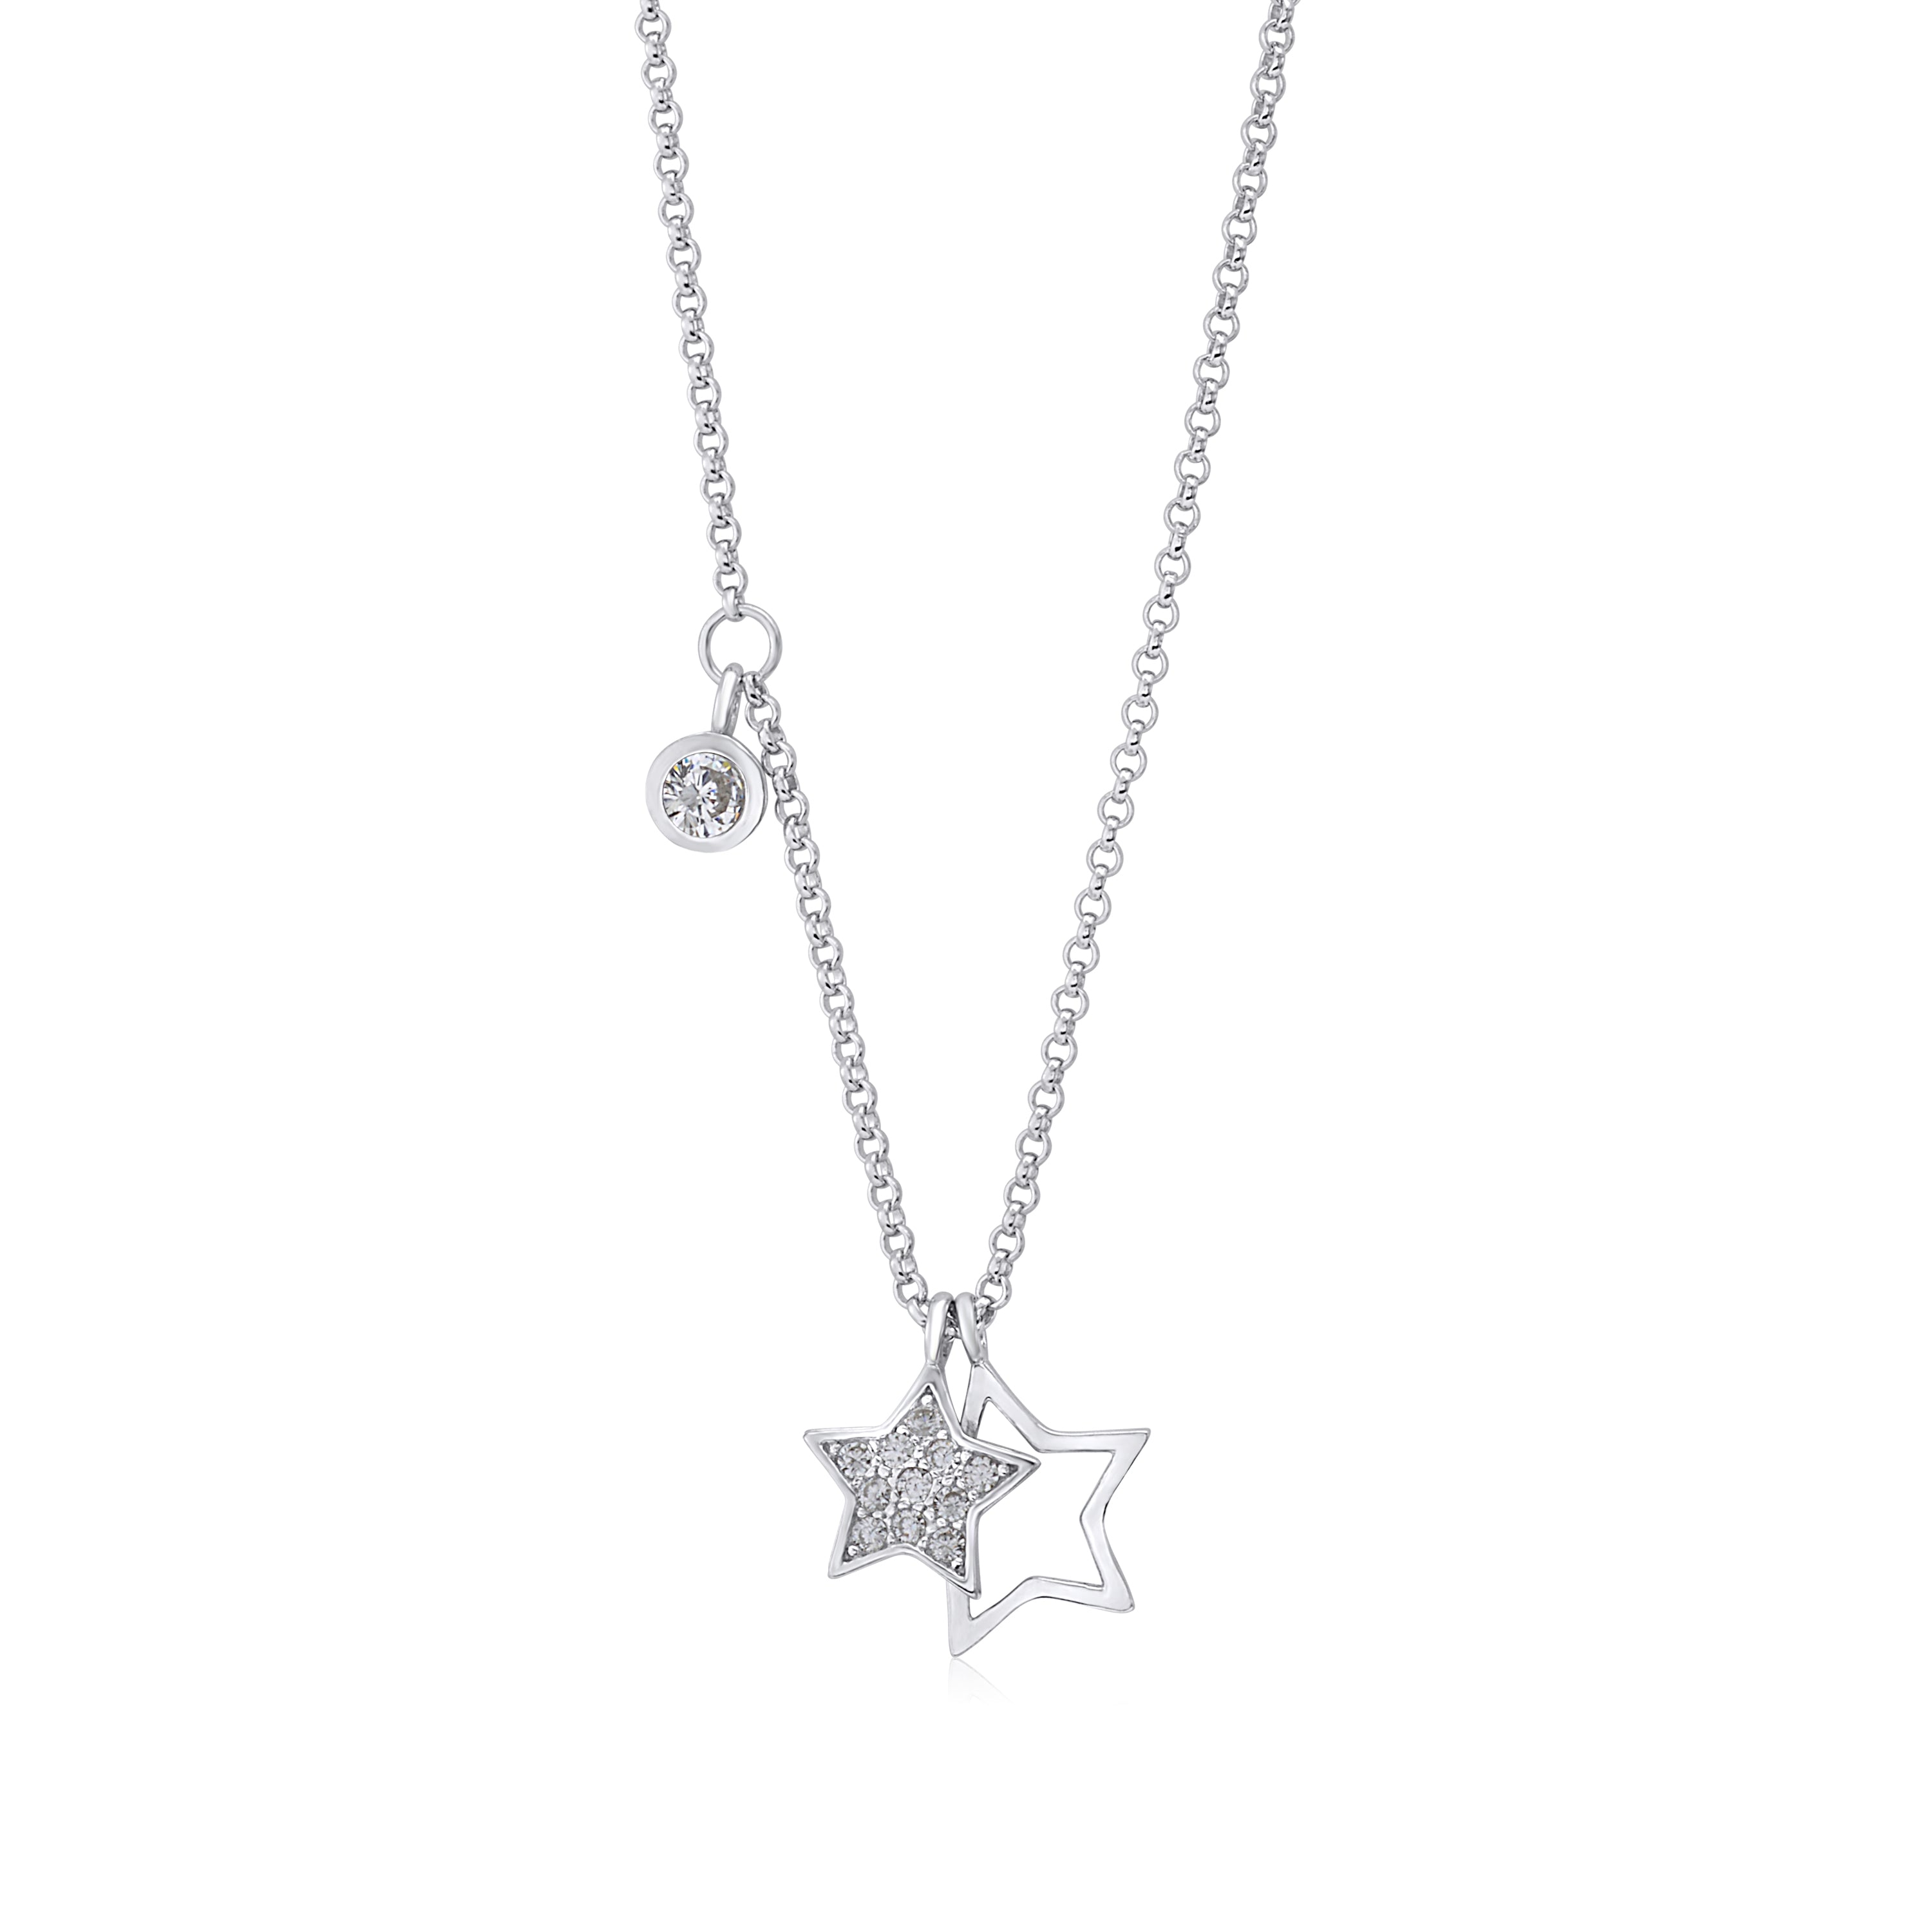 UNICORNJ Sterling Silver 925 Charm Pendant Necklace with Pavé Cubic Zirconia on Rolo Chain